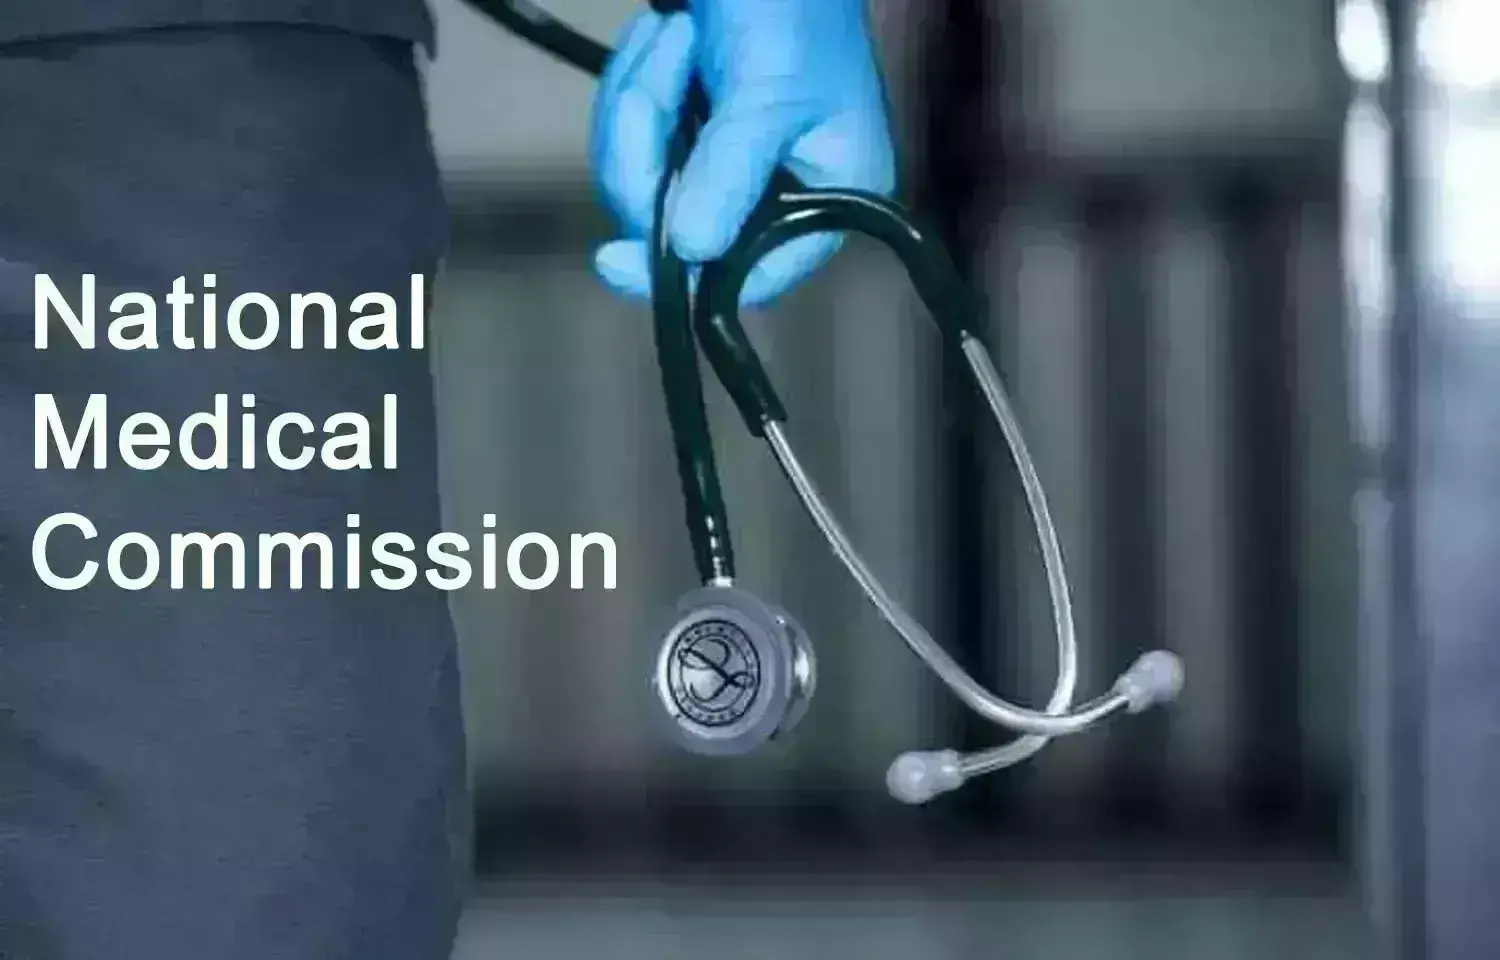 Establishment of New Medical Colleges, Increase in MBBS Seats: NMC gives deadline for applications